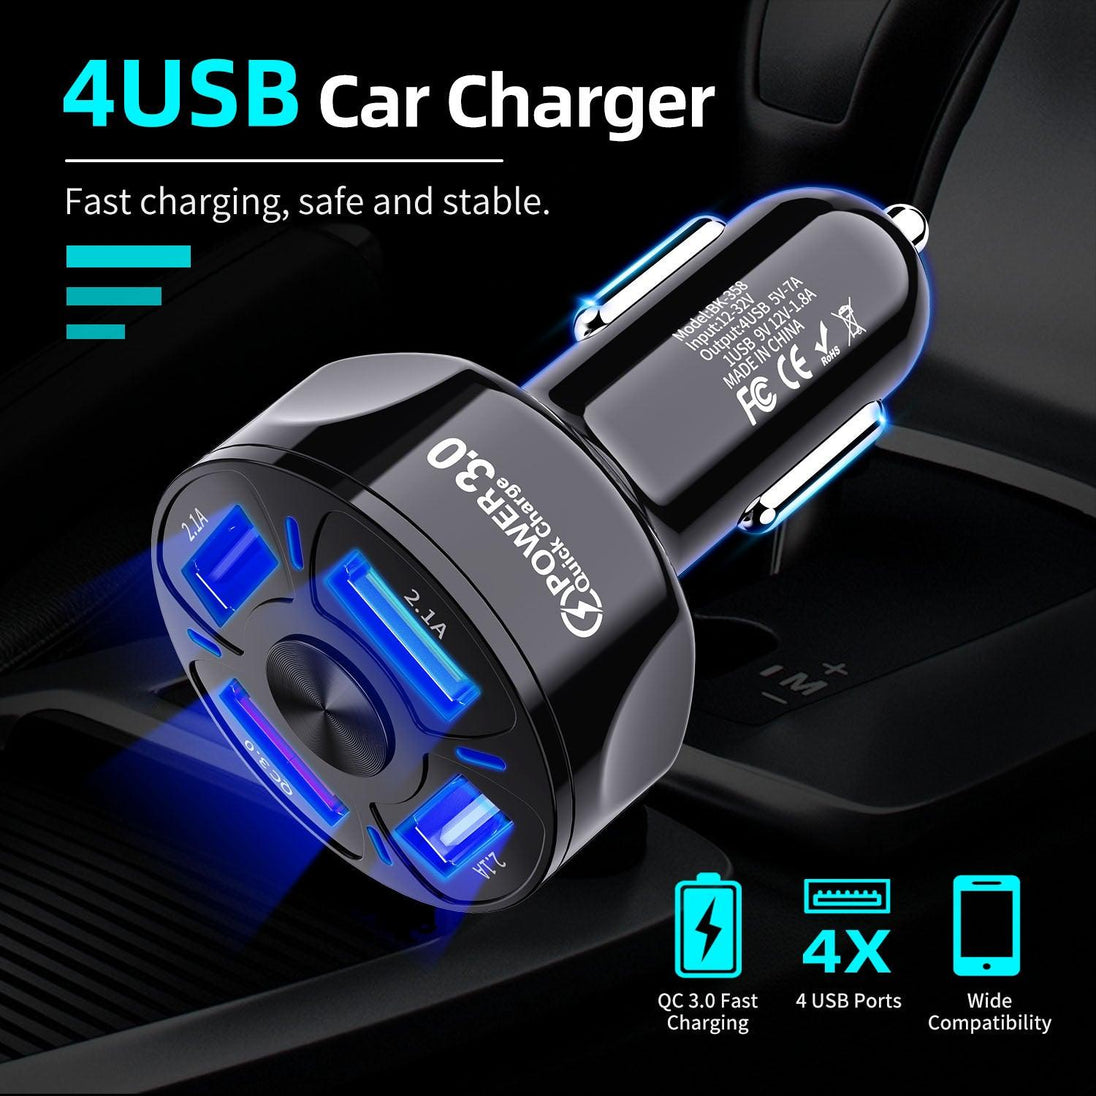 PBG LED 4 Port Rapid Car Charger - Charges 4 Devices at once! - PremiumBrandGoods